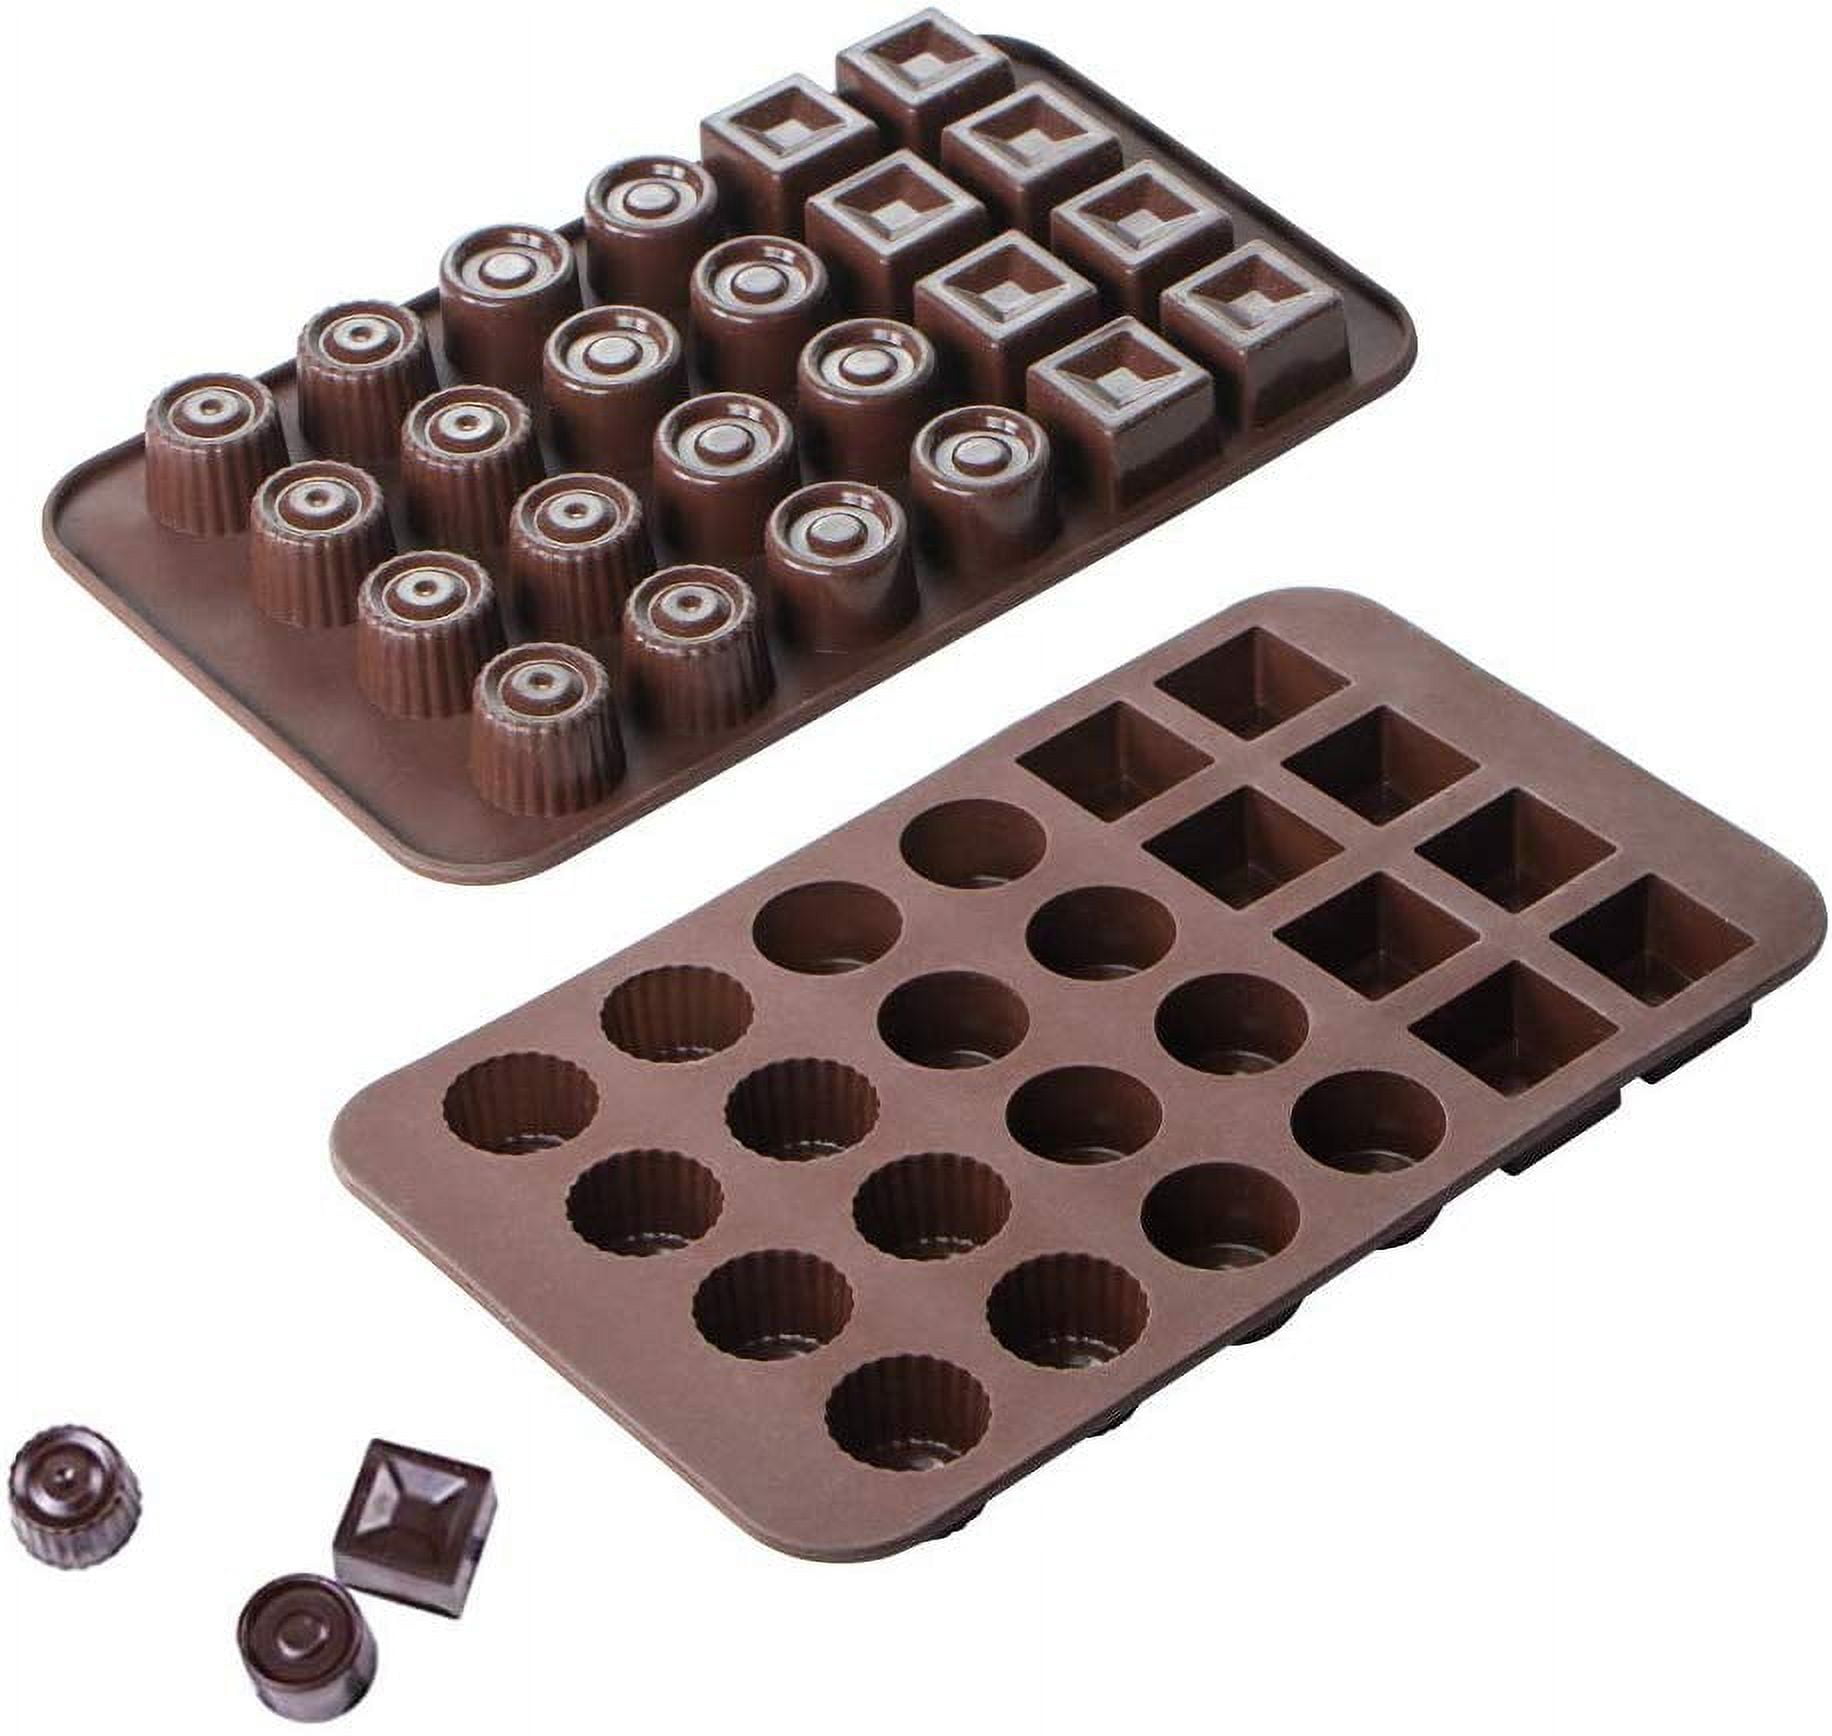 JOERSH Silicone Chocolate Molds for Fat Bombs Snacks & Truffles